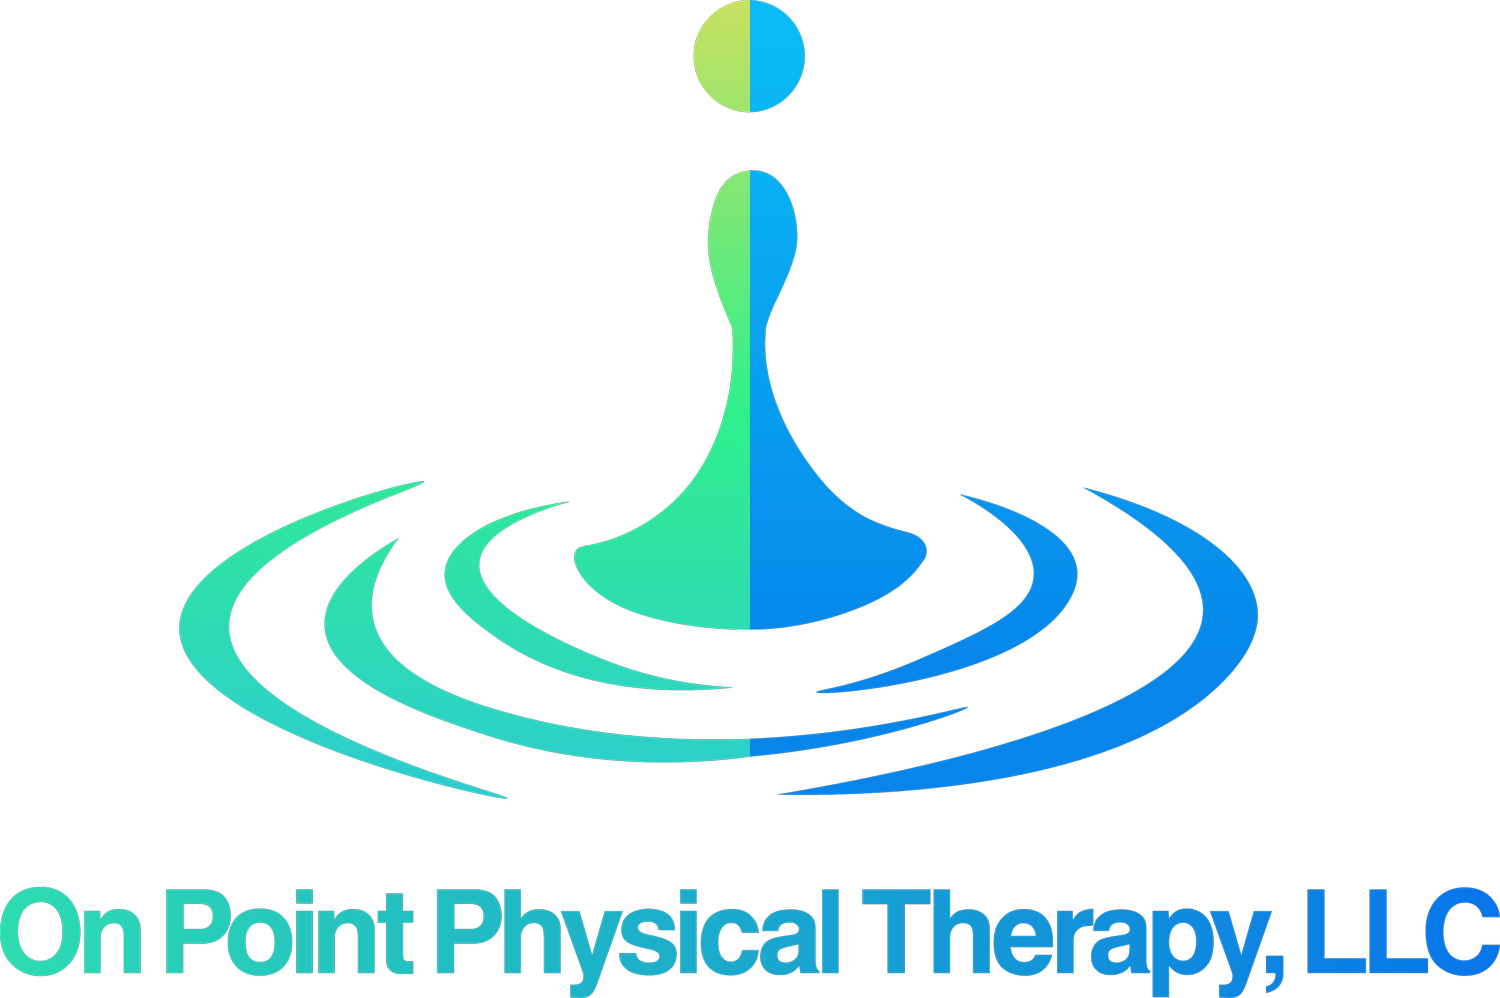 On Point Physical Therapy, LLC